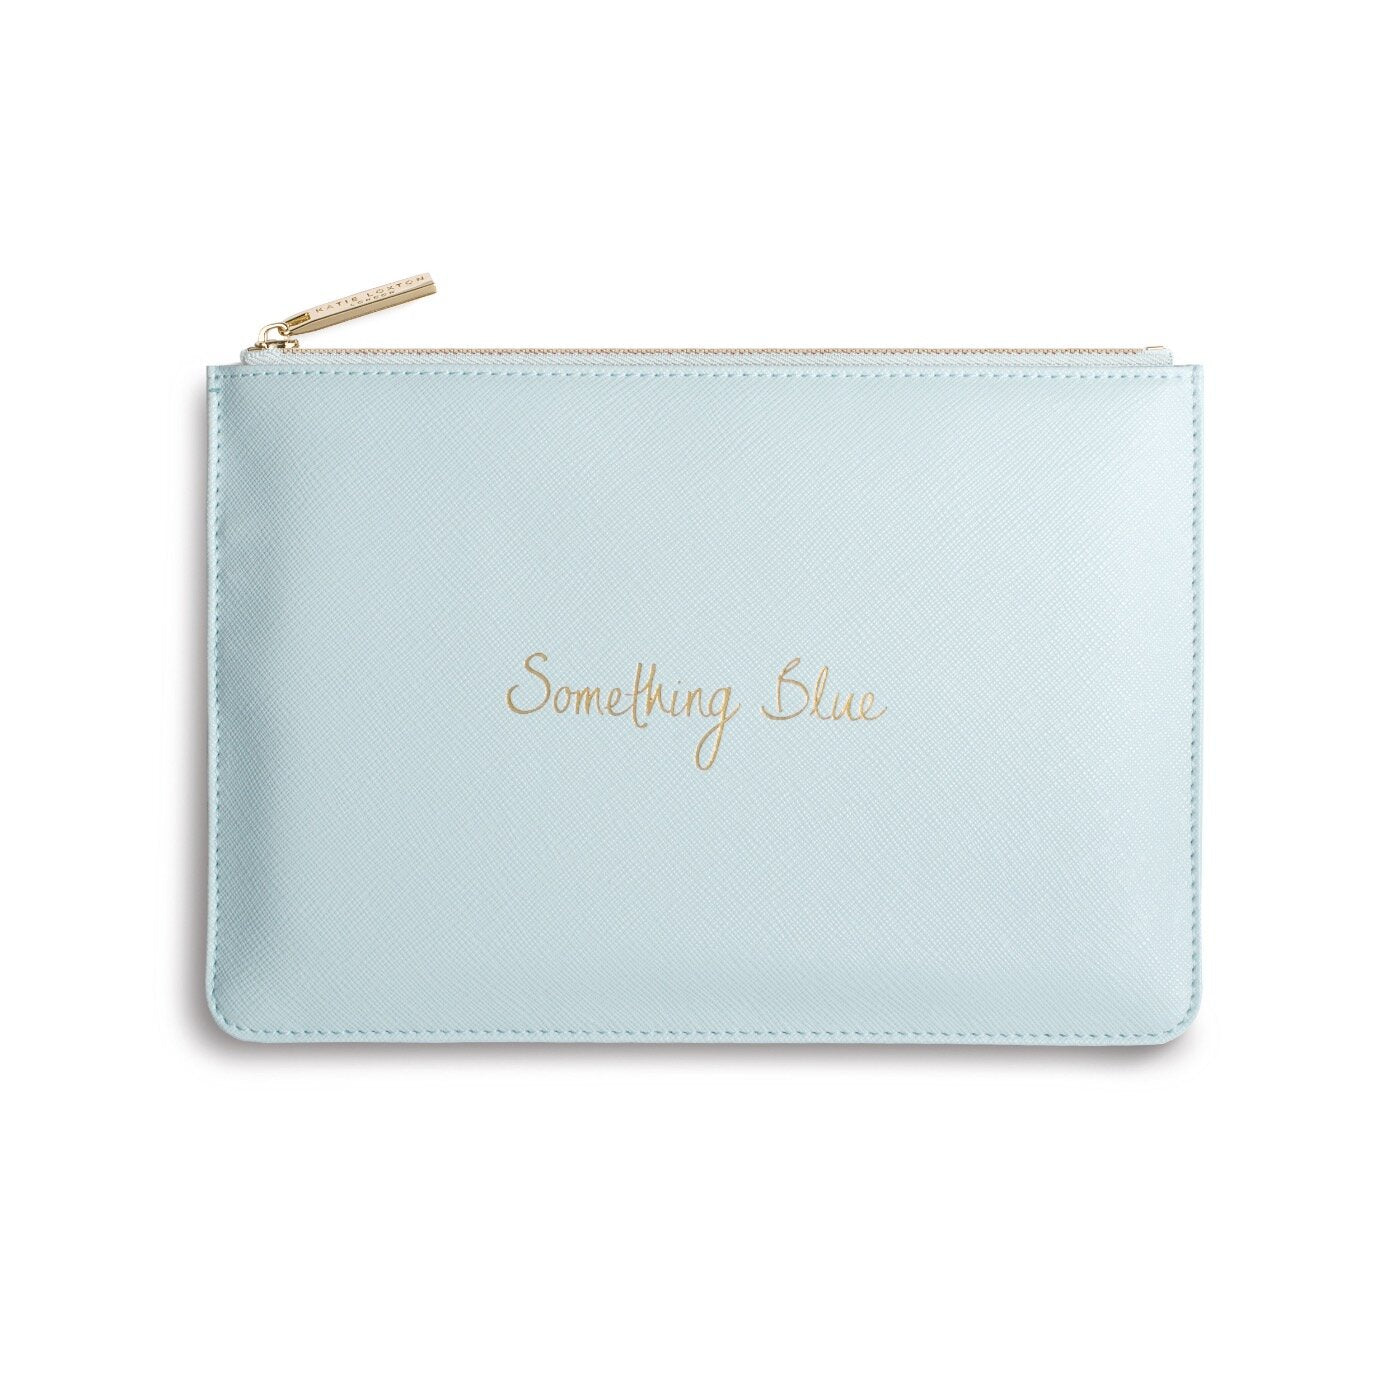 Perfect Pouch - Something Blue